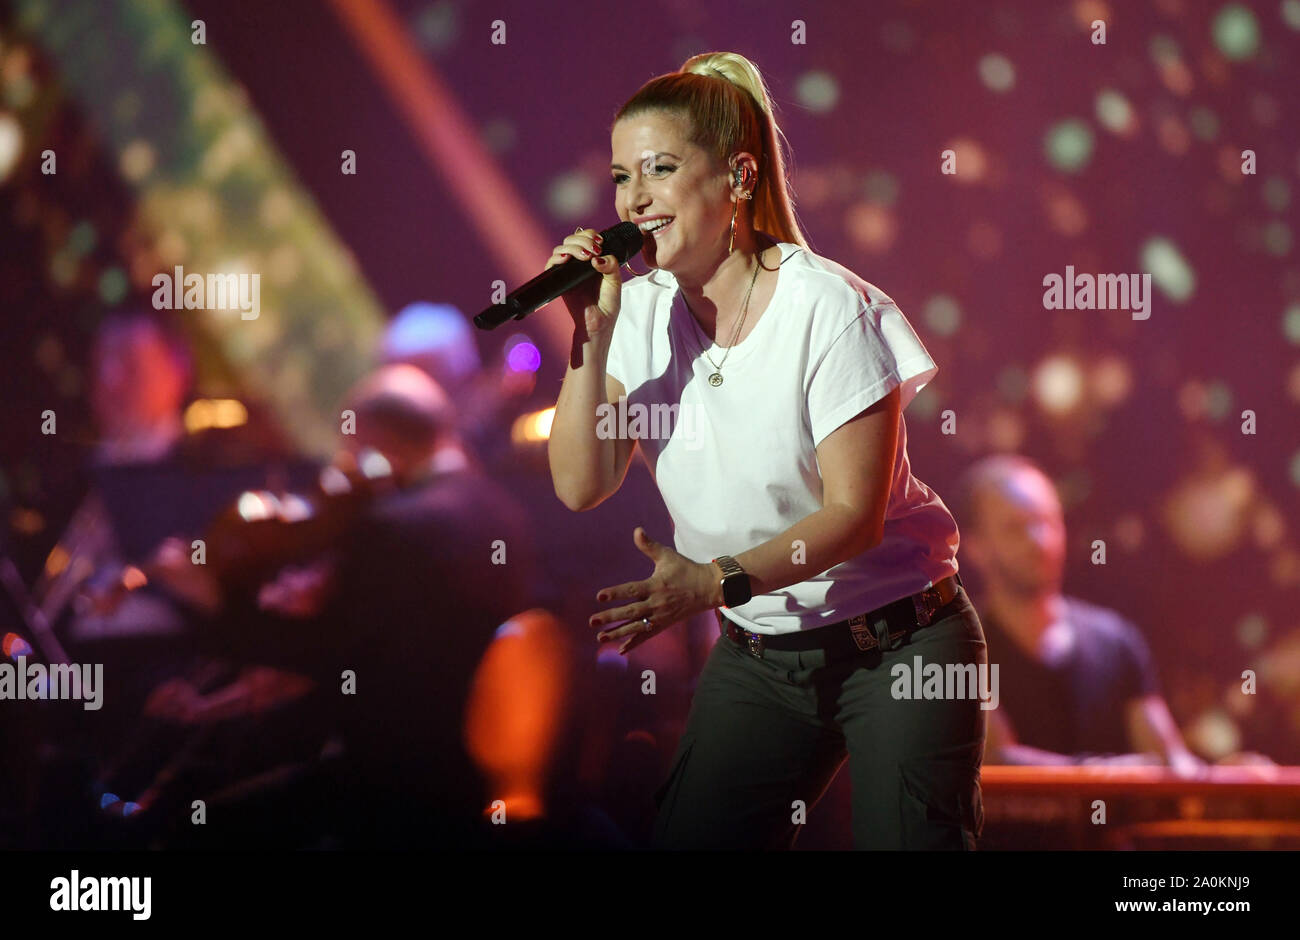 Leipzig, Germany. 20th Sep, 2019. The singer and actress Jeanette Biedermann sings during the television gala 'Goldene Henne'. A total of 53 nominees from show business, society and sport can hope for the award. The Golden Hen is dedicated to the GDR entertainer Hahnemann, who died in 1991. Credit: Hendrik Schmidt/dpa-Zentralbild/dpa/Alamy Live News Stock Photo